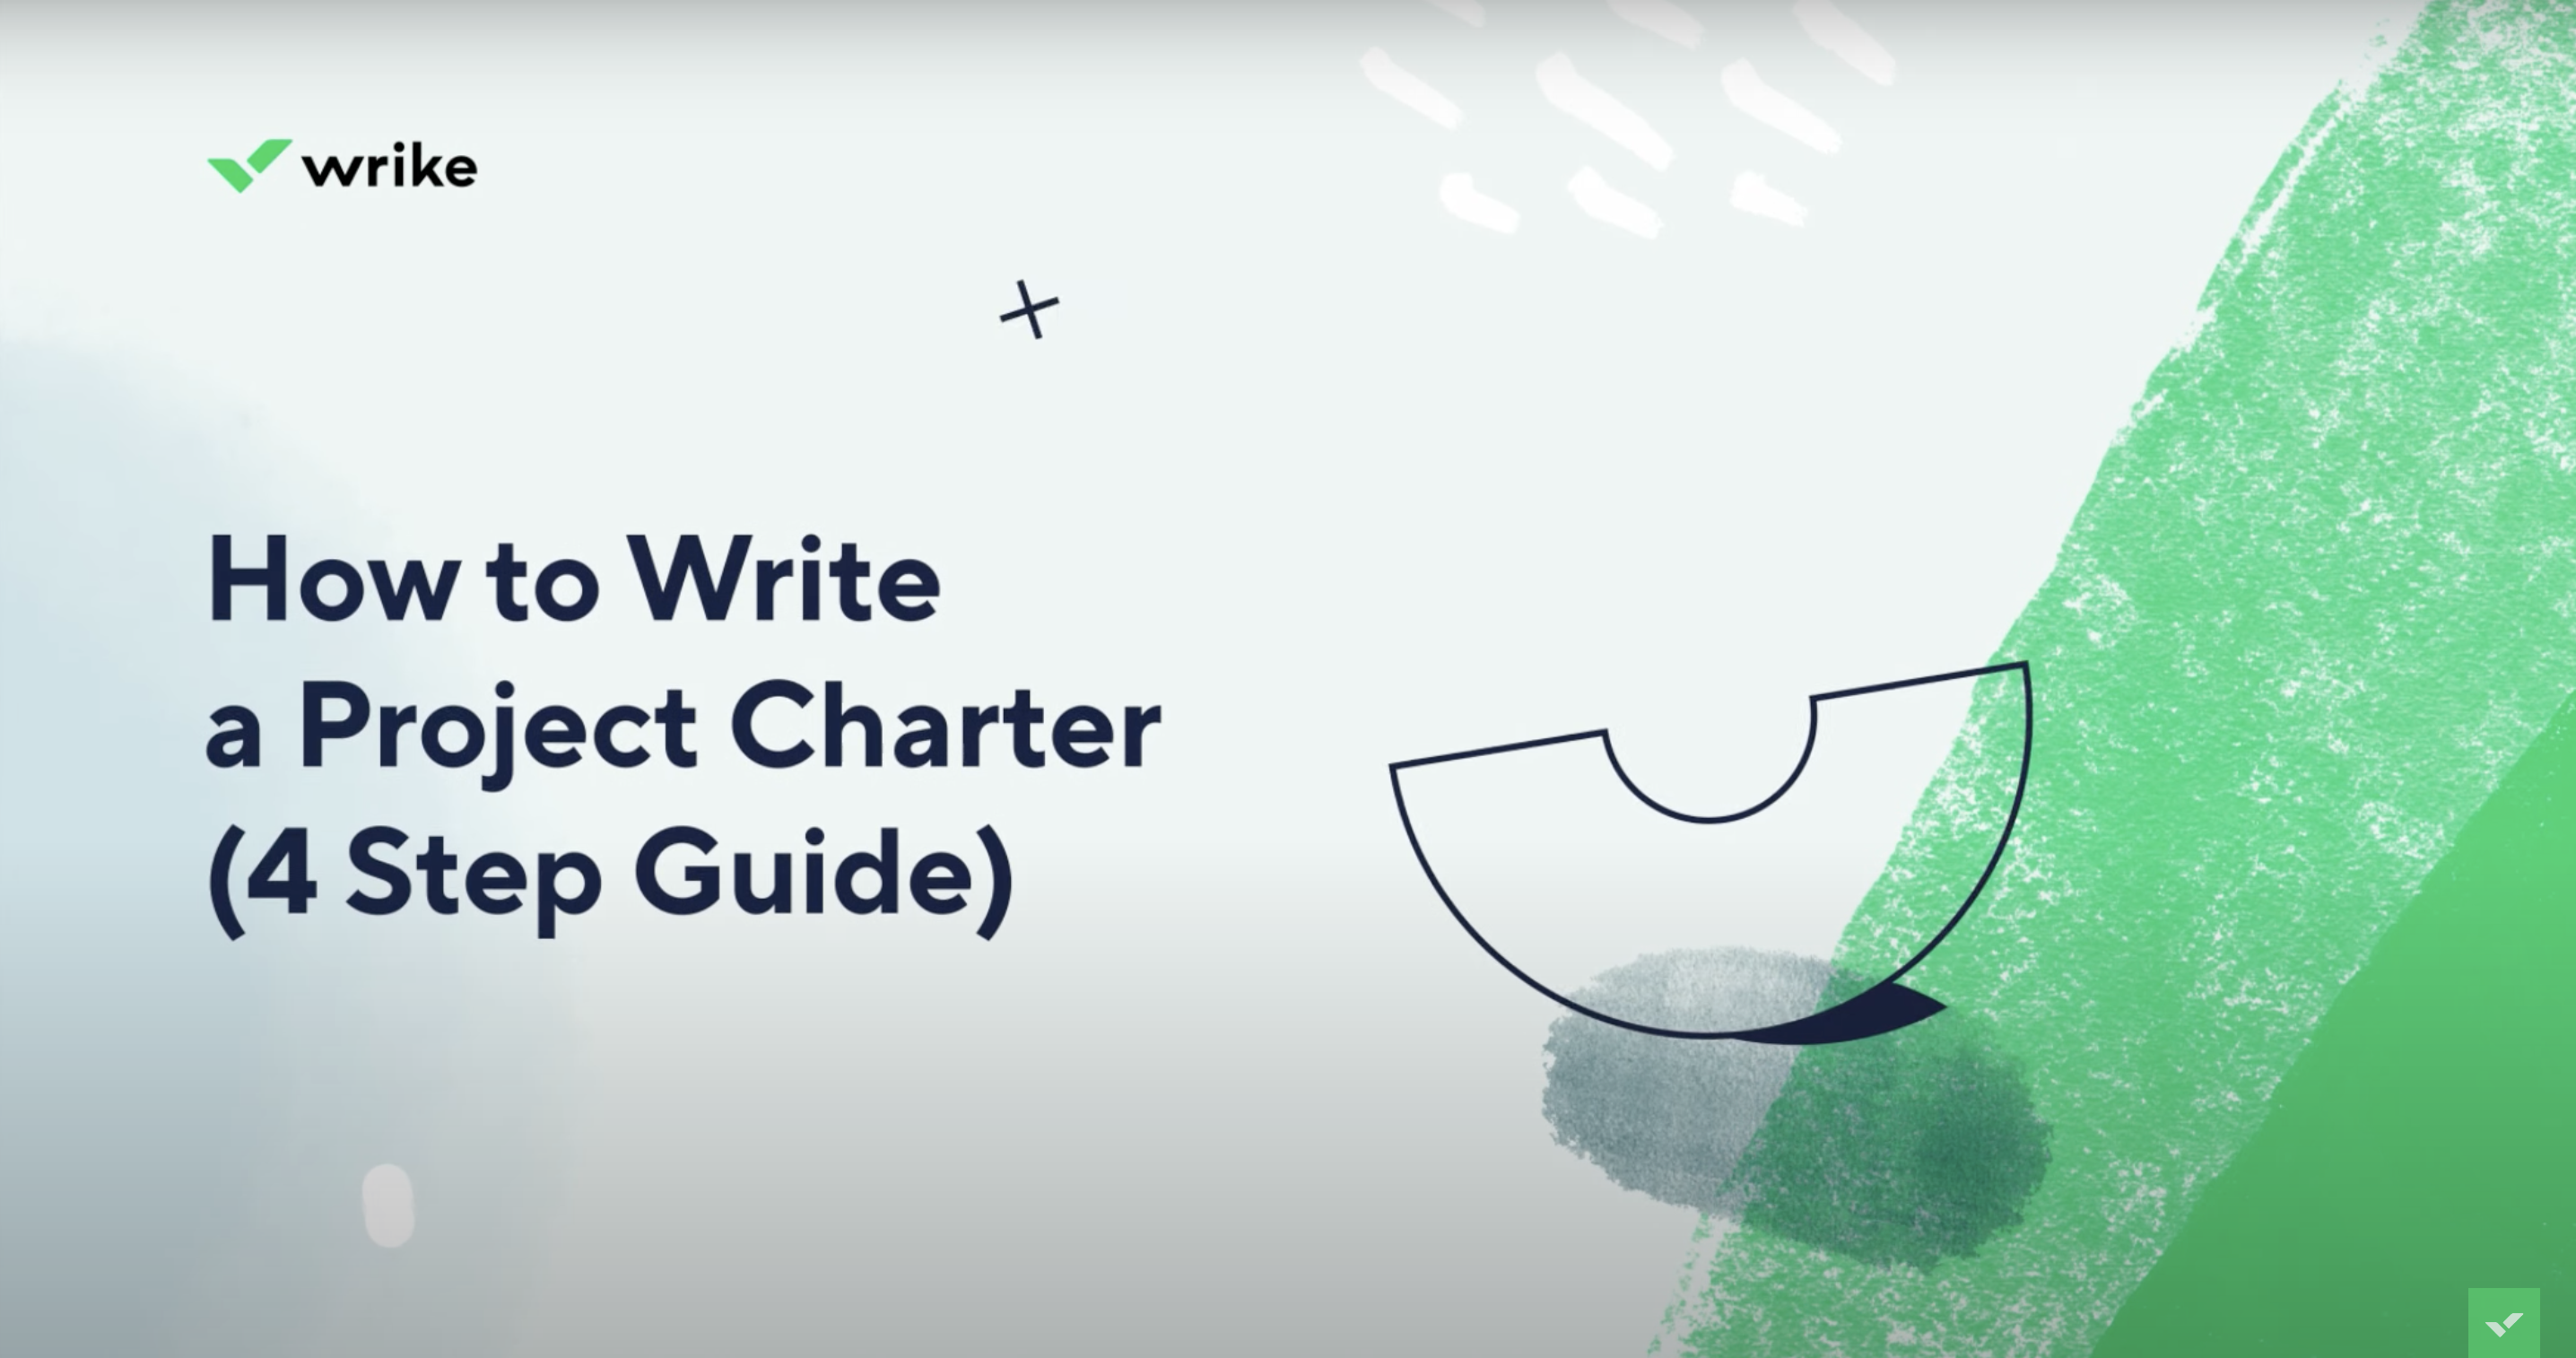 Chapter 3 Project Charter